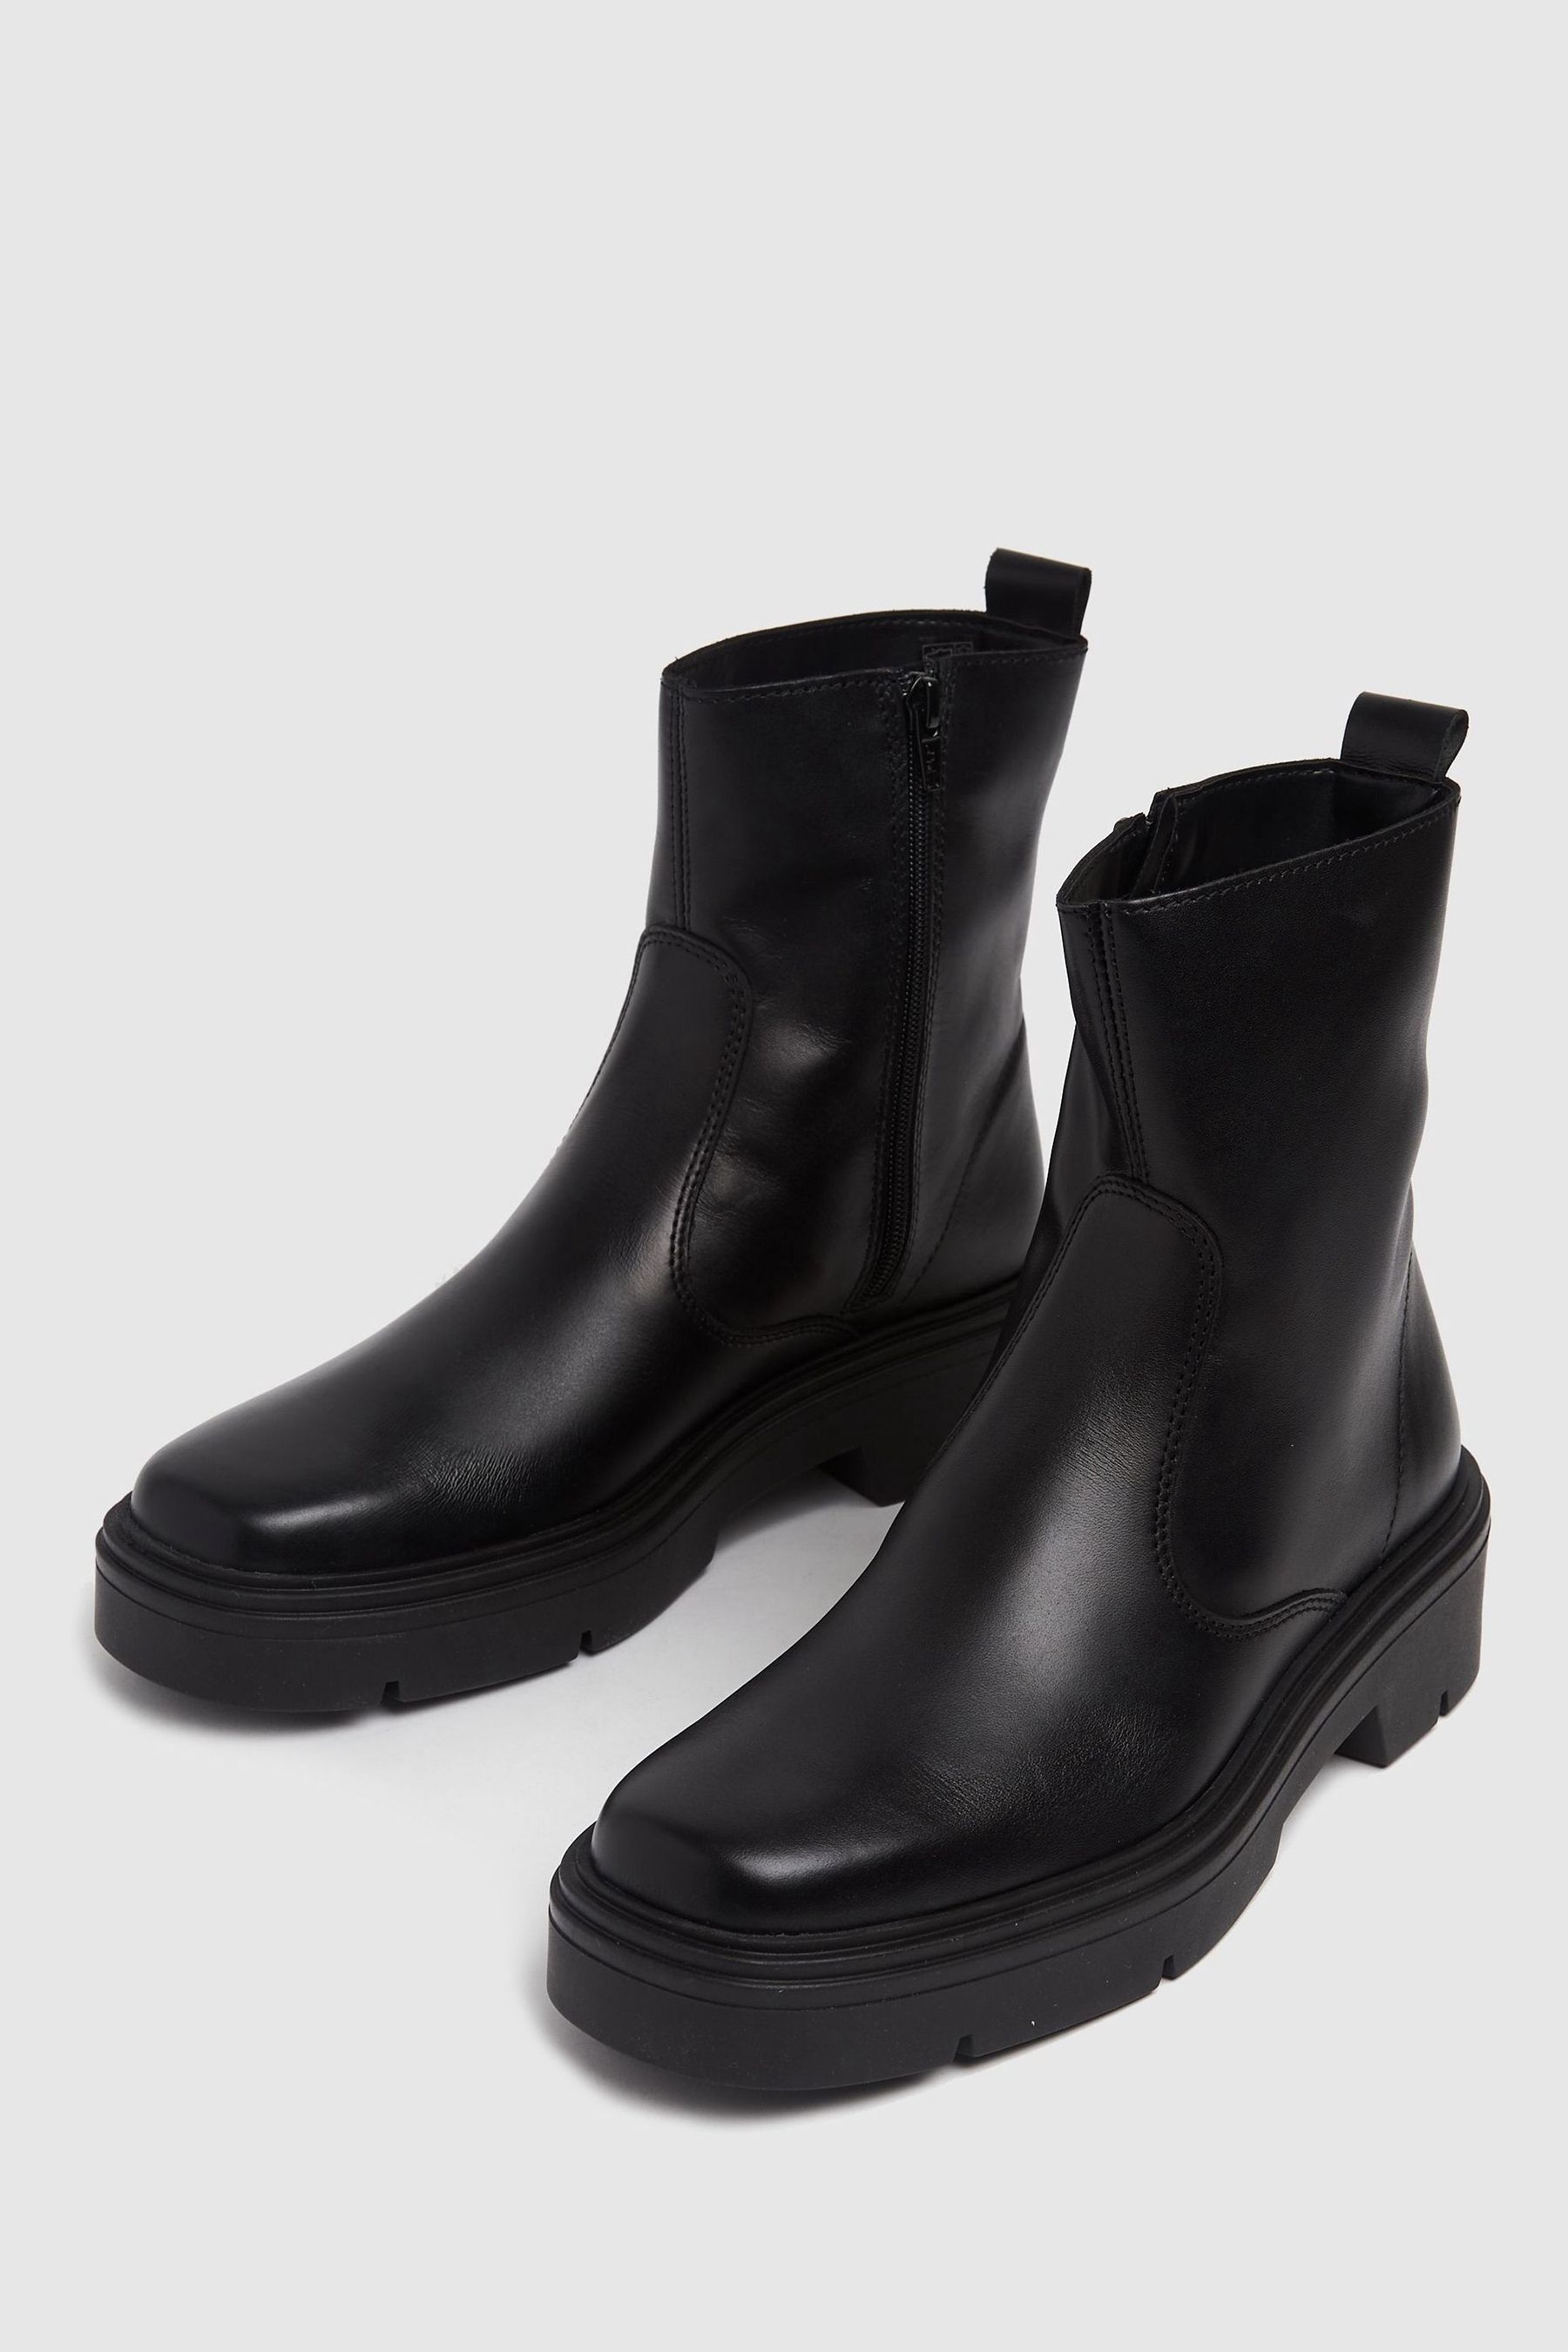 Buy Schuh Black Alina Leather Sock Boots from the Next UK online shop